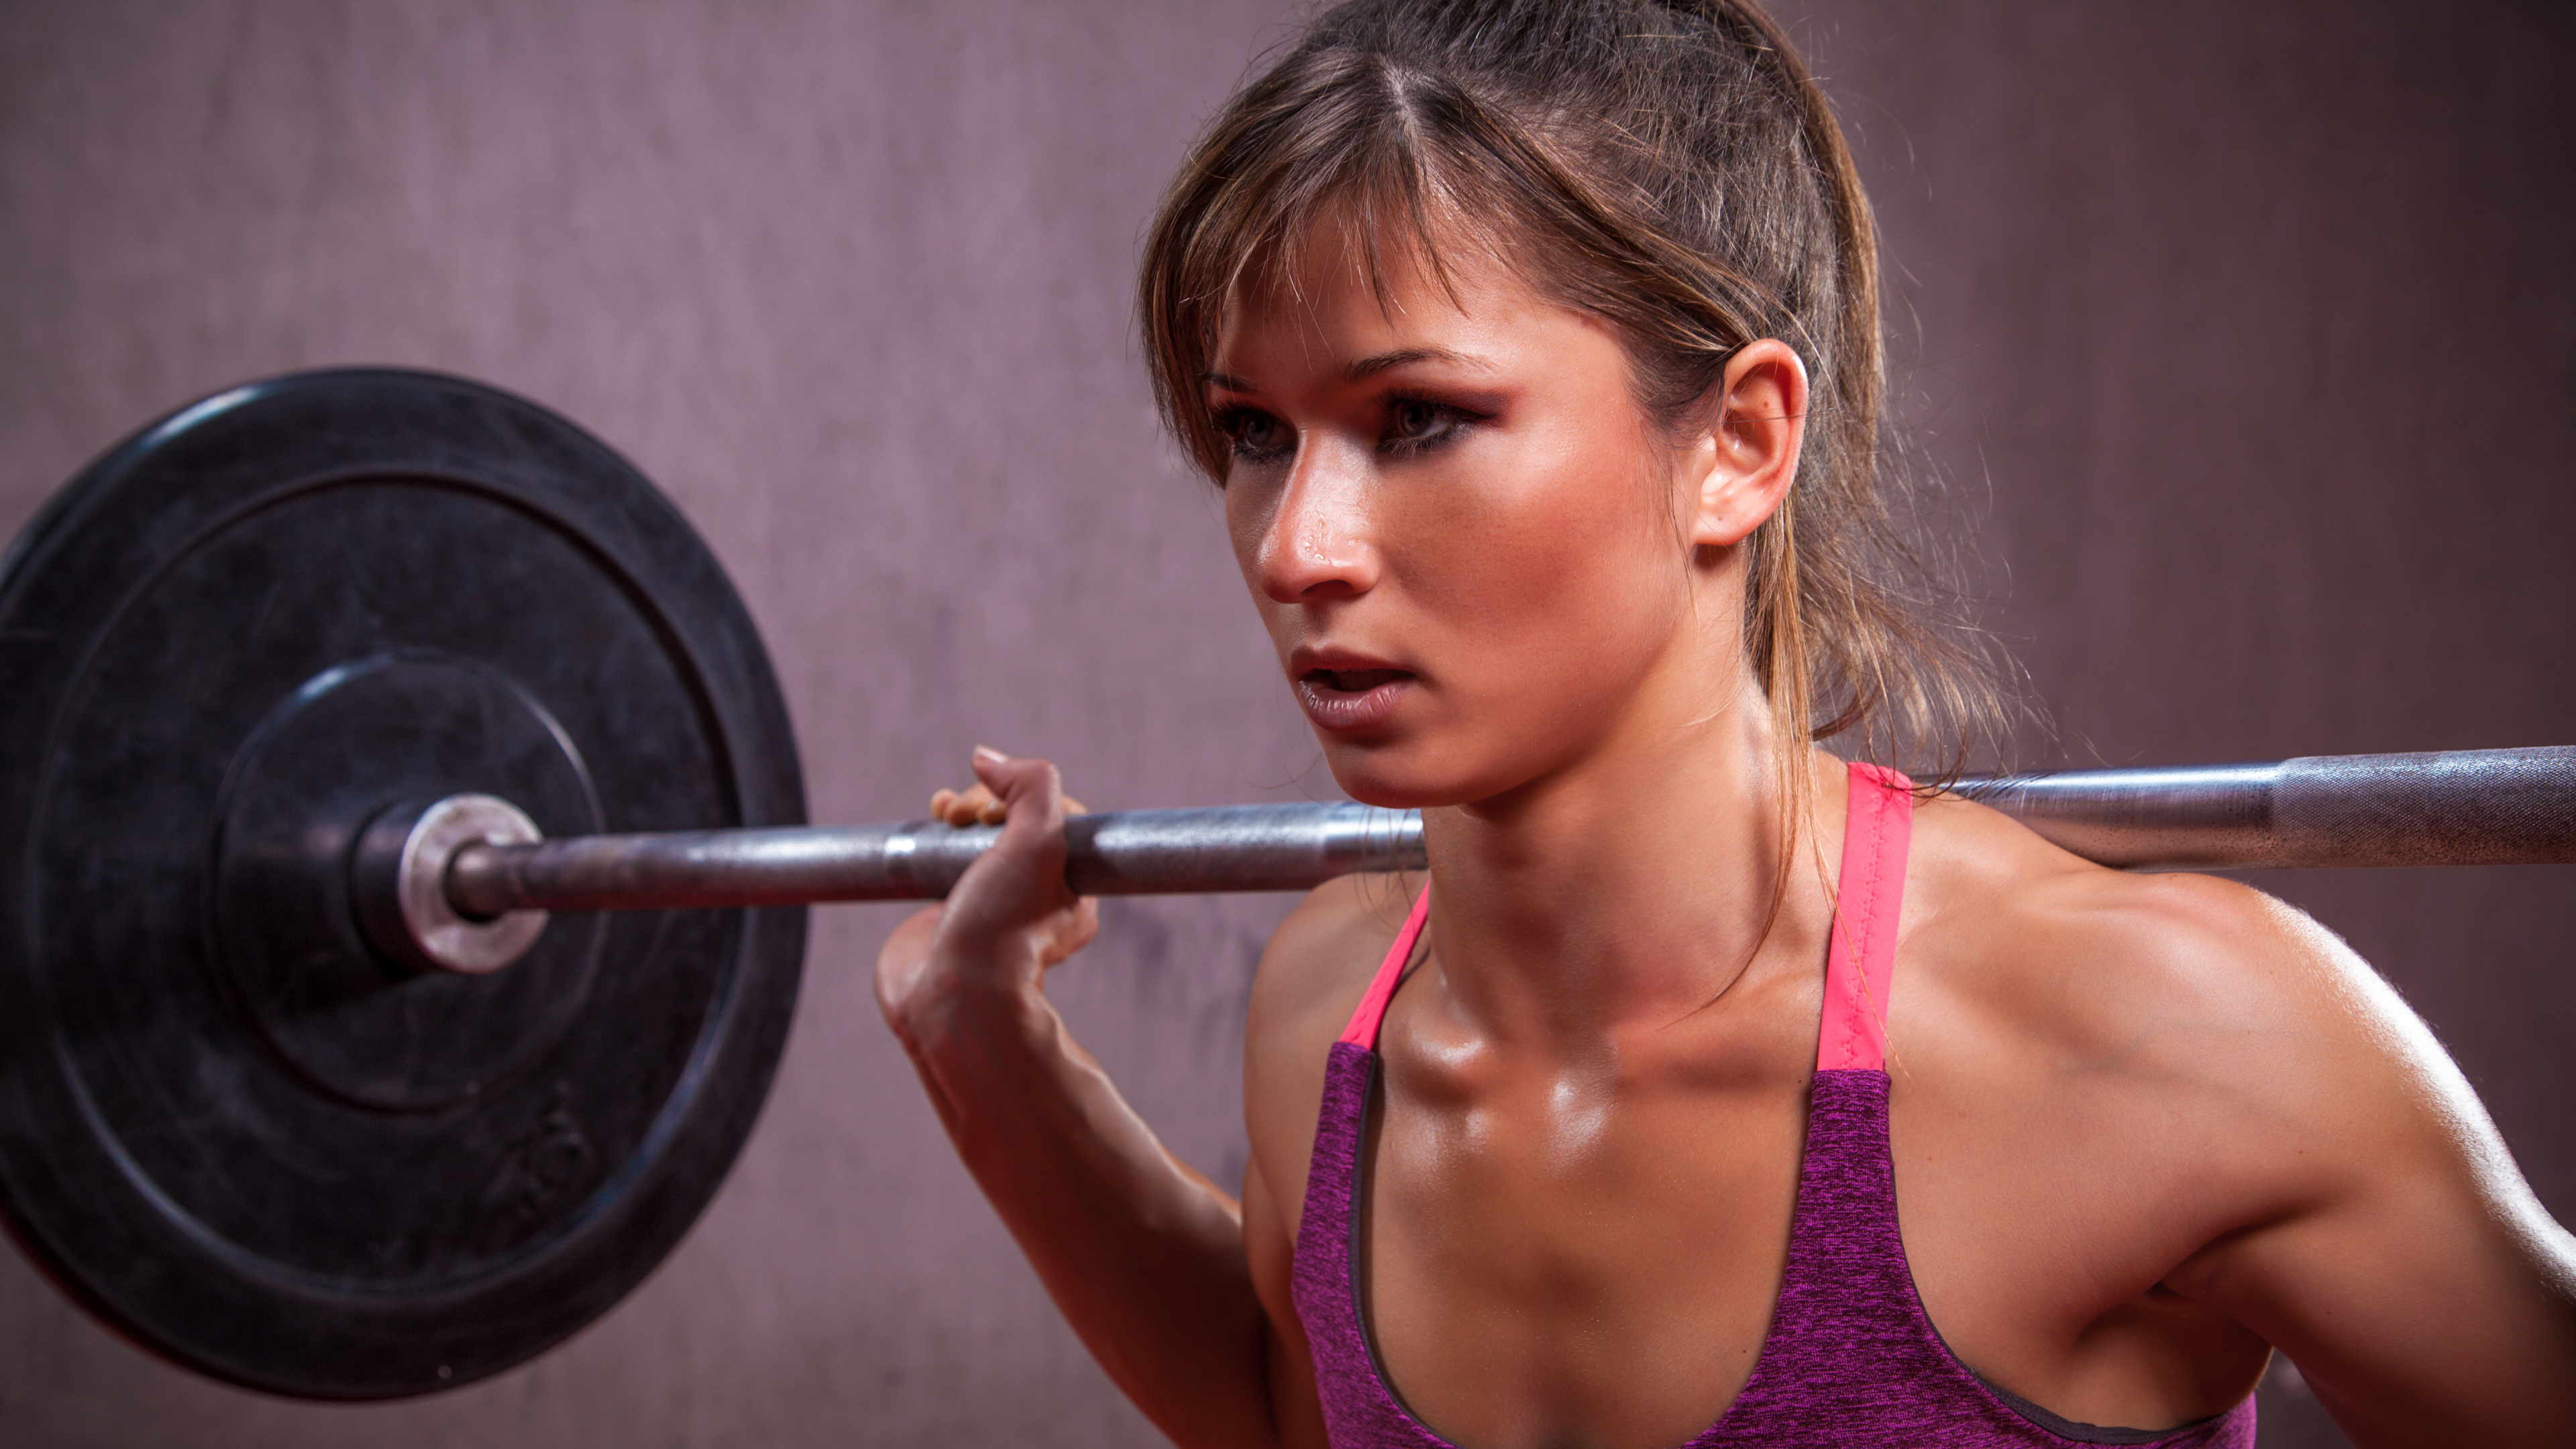 Woman in Pink Tank Top Holding Barbell. Wallpaper in 3840x2160 Resolution